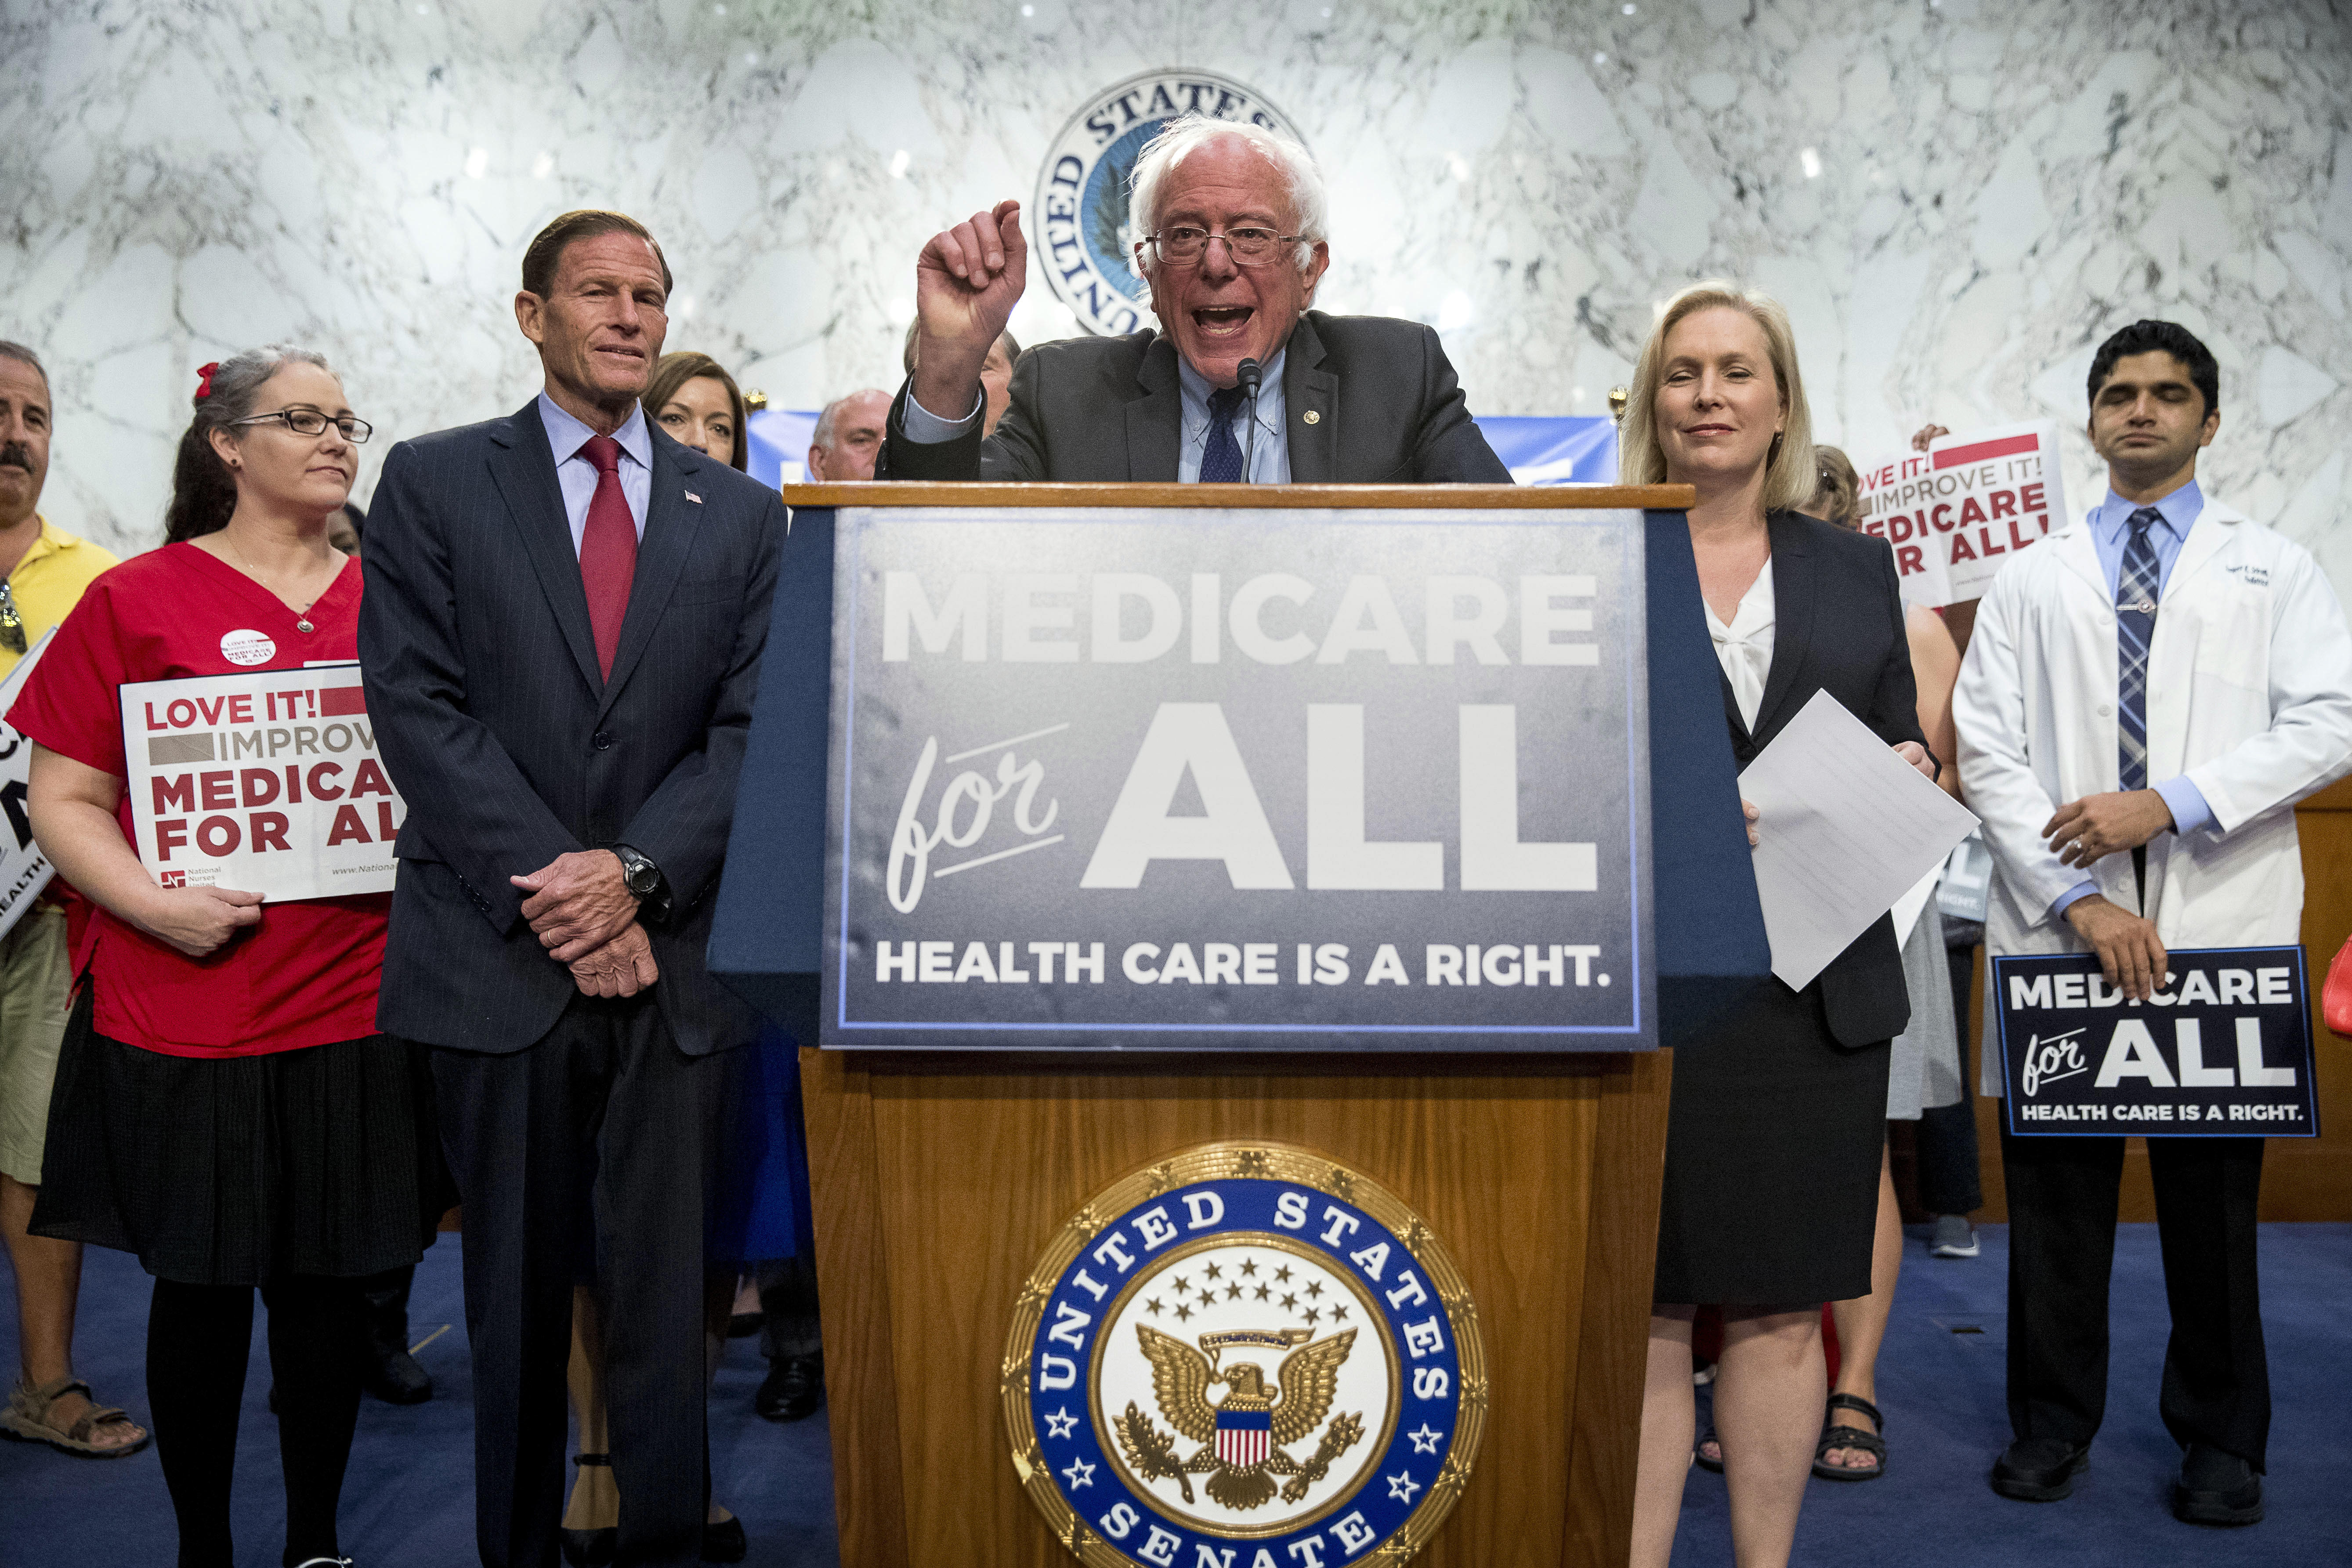 How exactly would single-payer health care work?